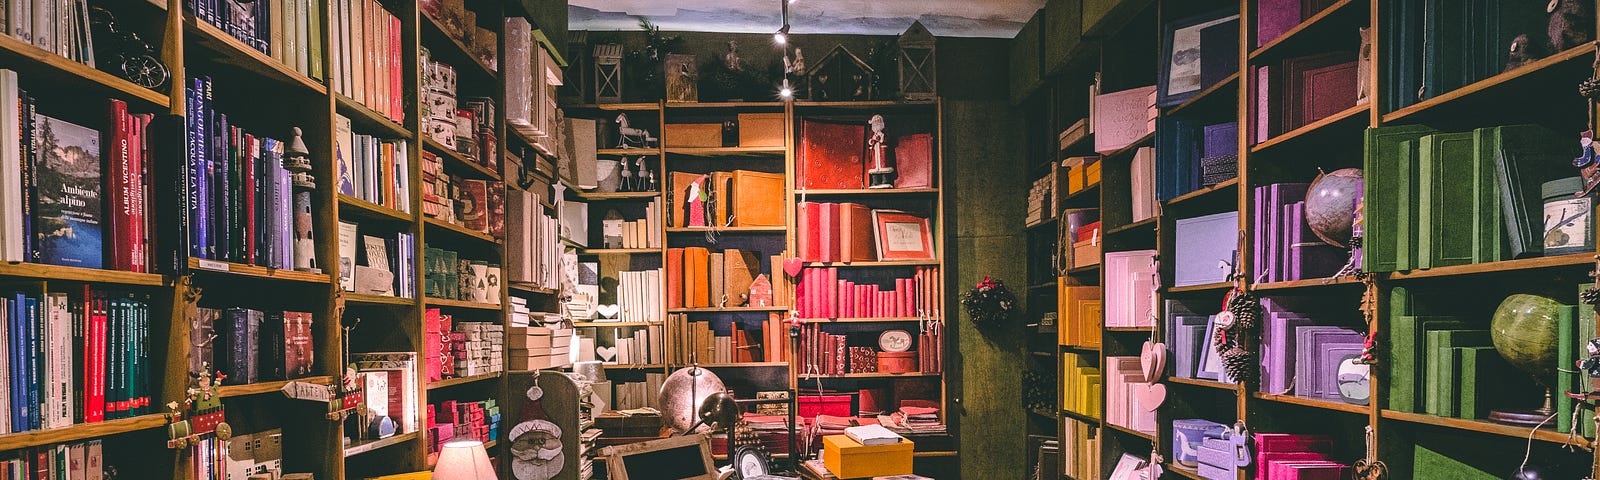 The interior of a colorful, independent bookshop.